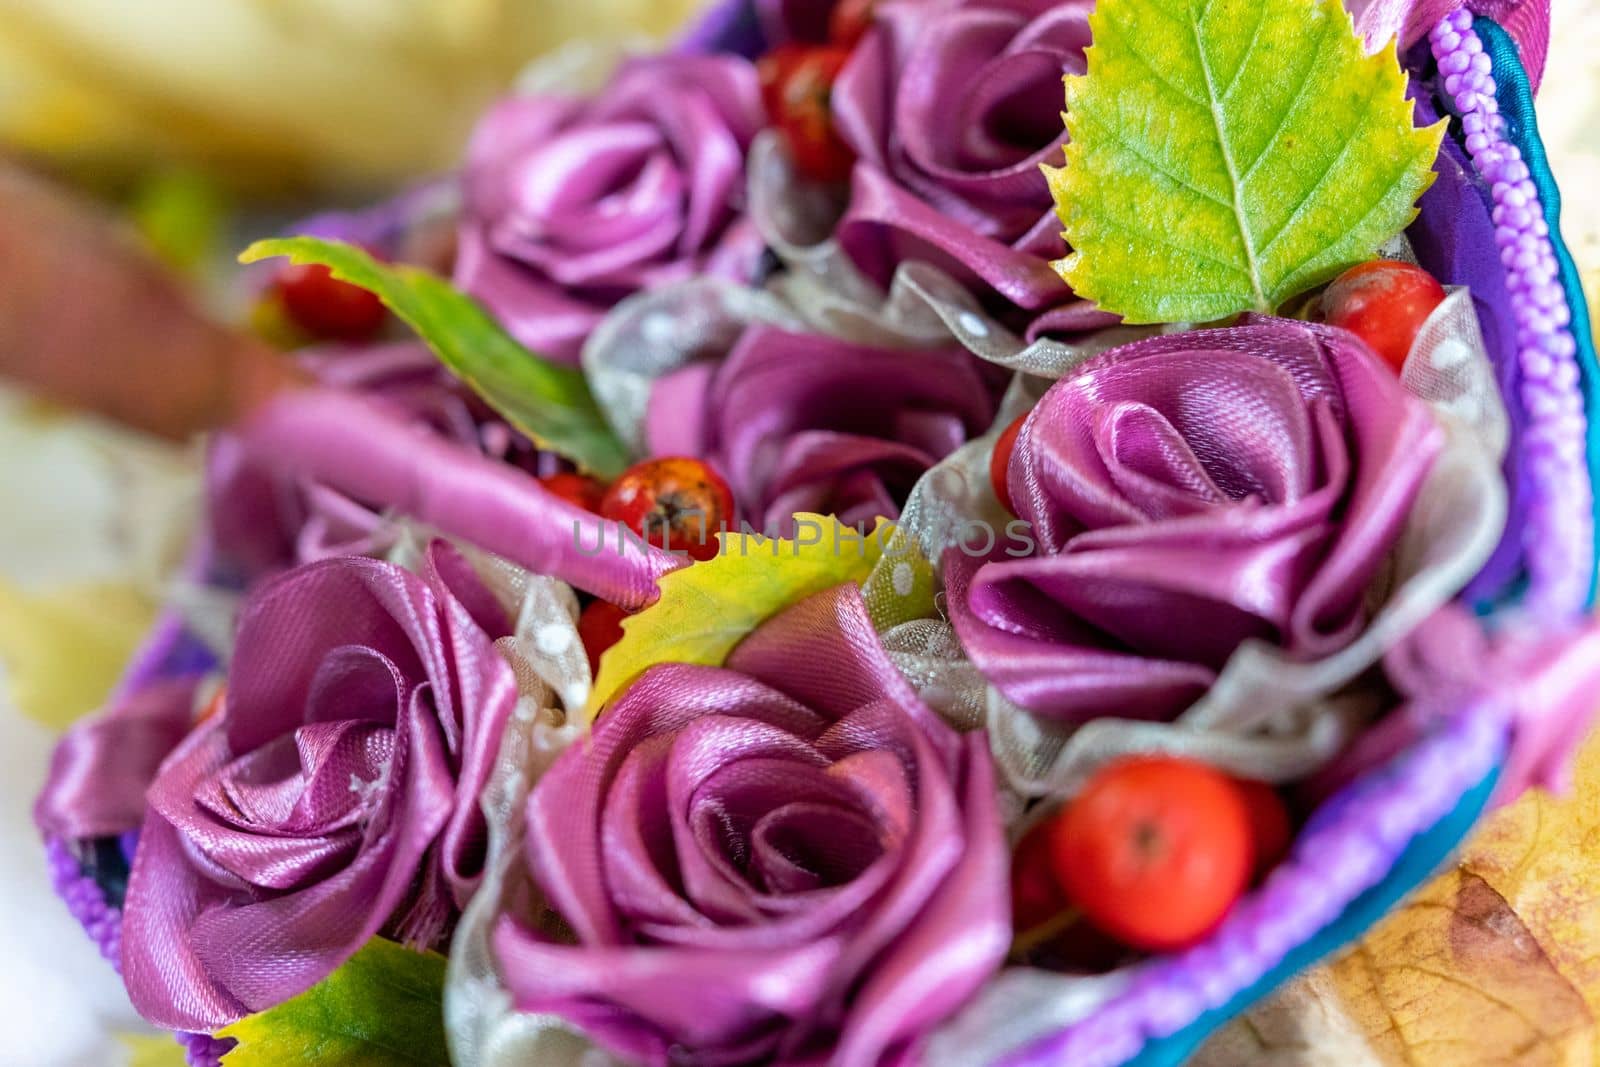 A beautiful bouquet of flowers made of purple fabric